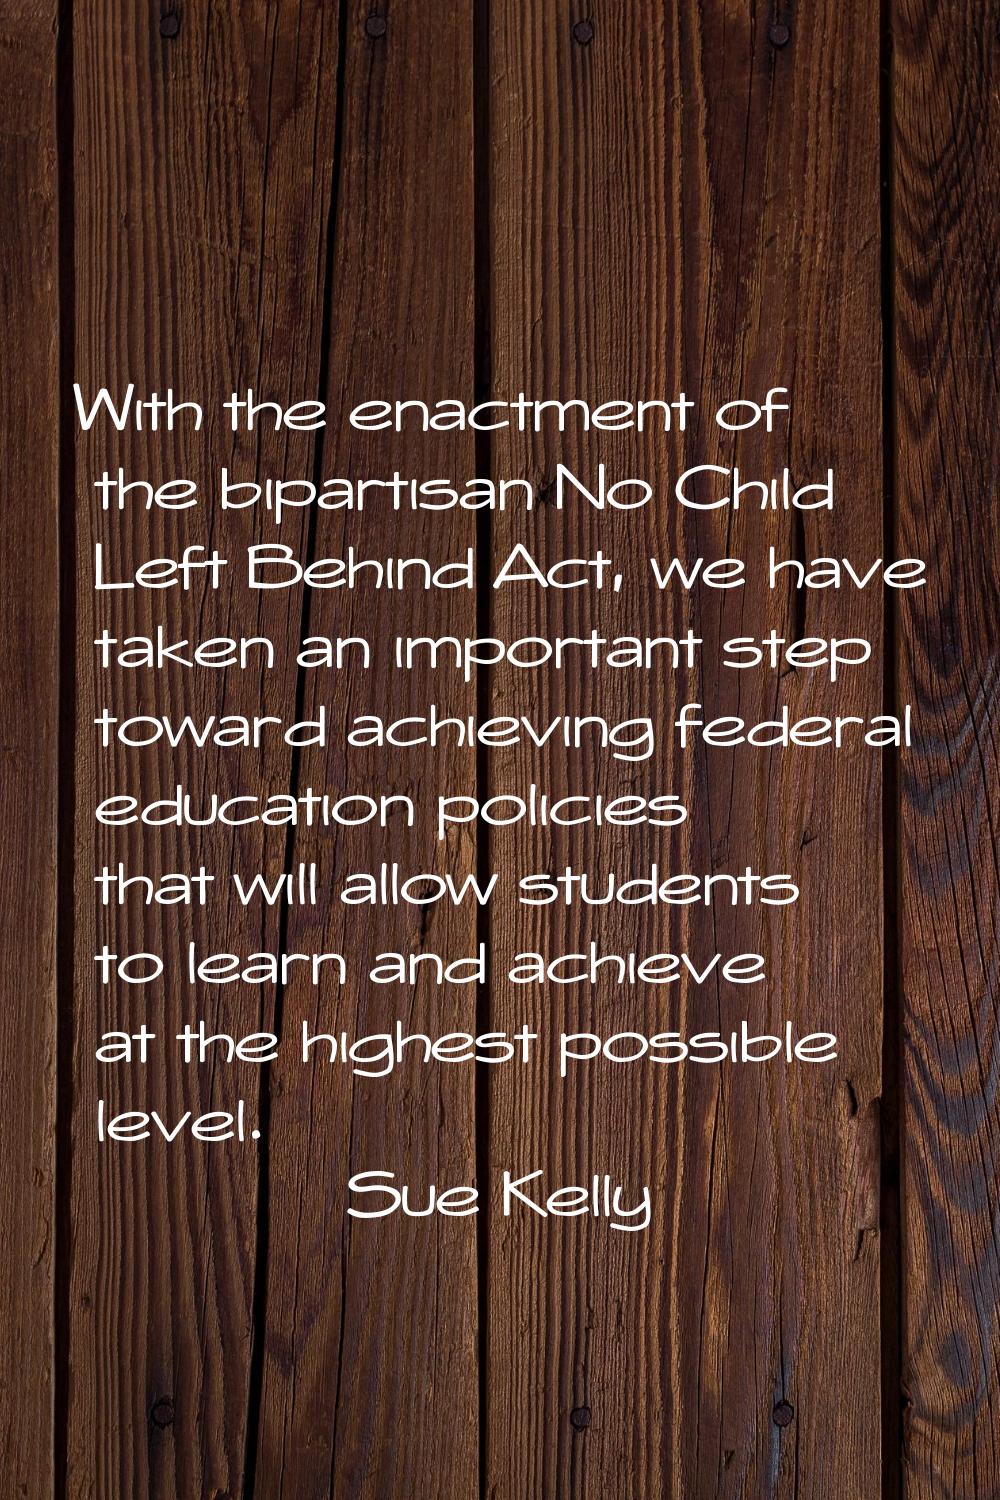 With the enactment of the bipartisan No Child Left Behind Act, we have taken an important step towa